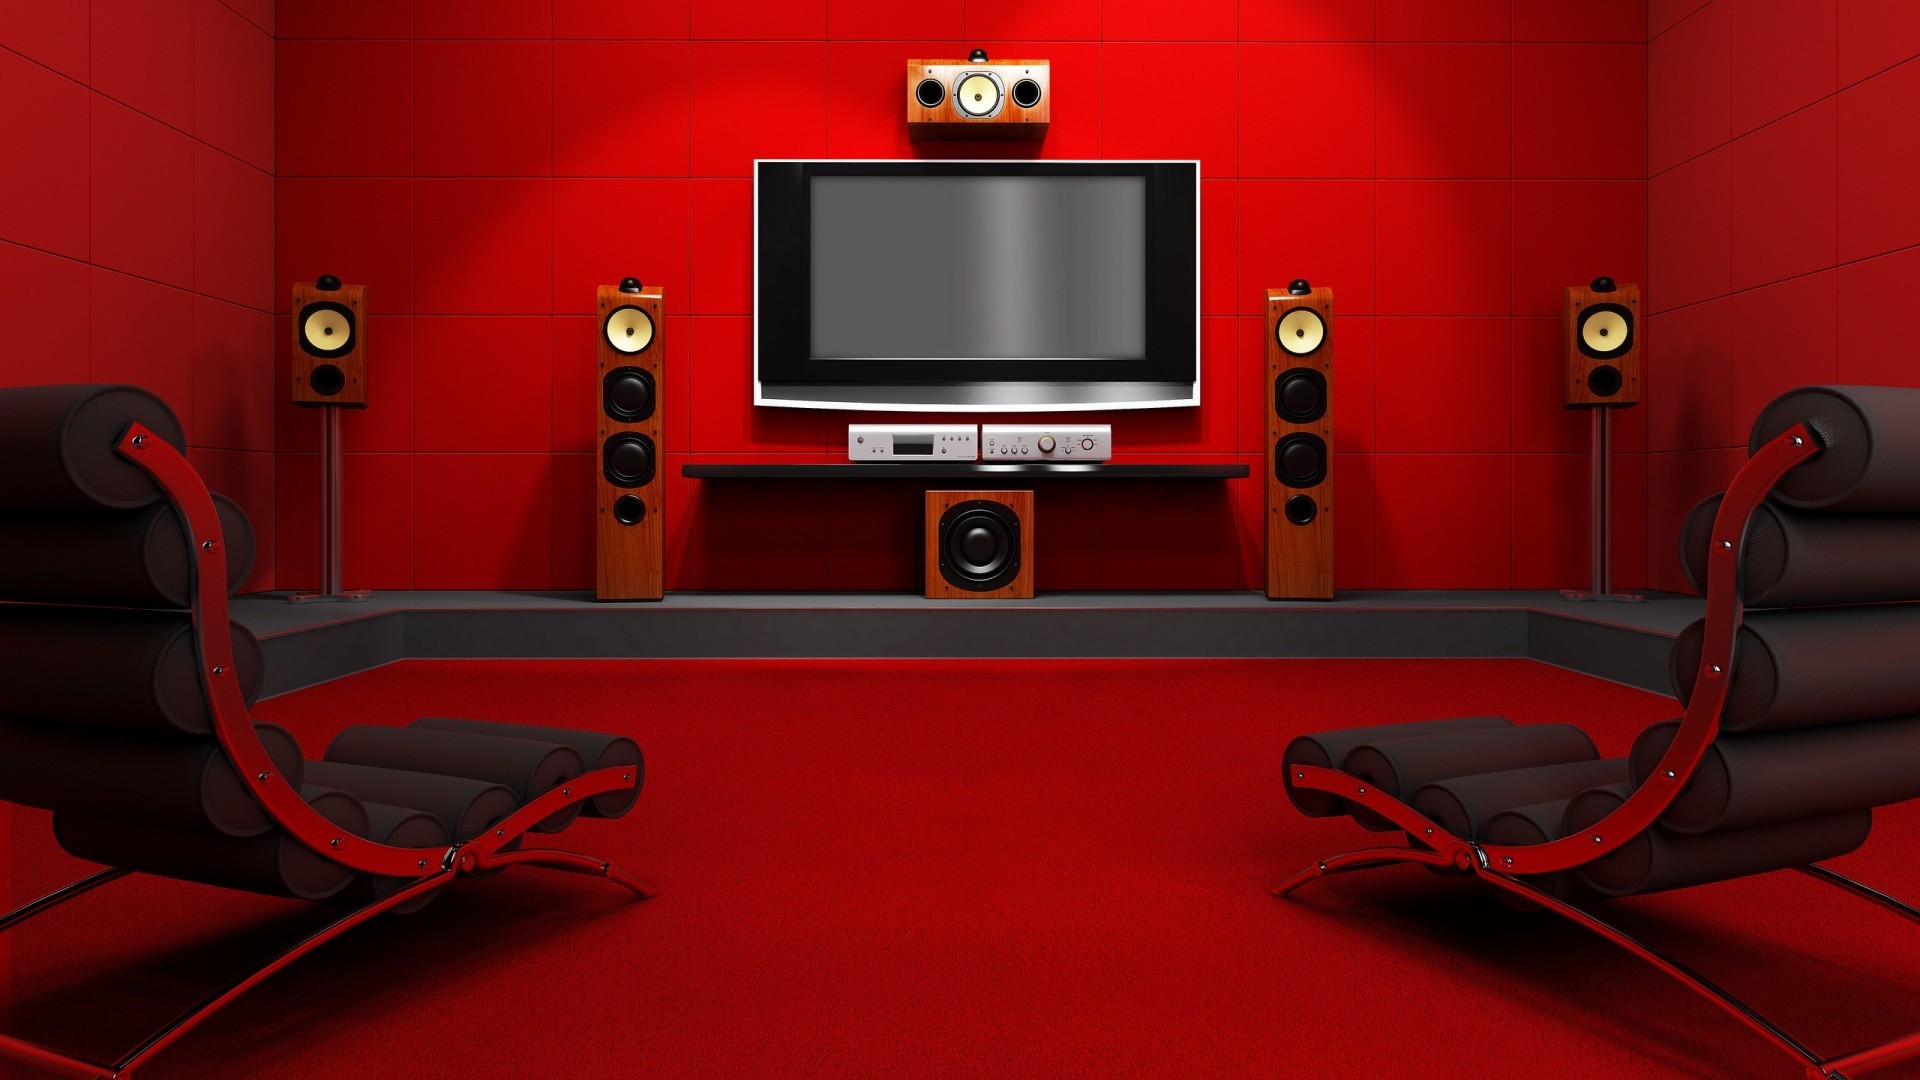 Indoors Television Sets Chair Speakers B W Speakers 1920x1080